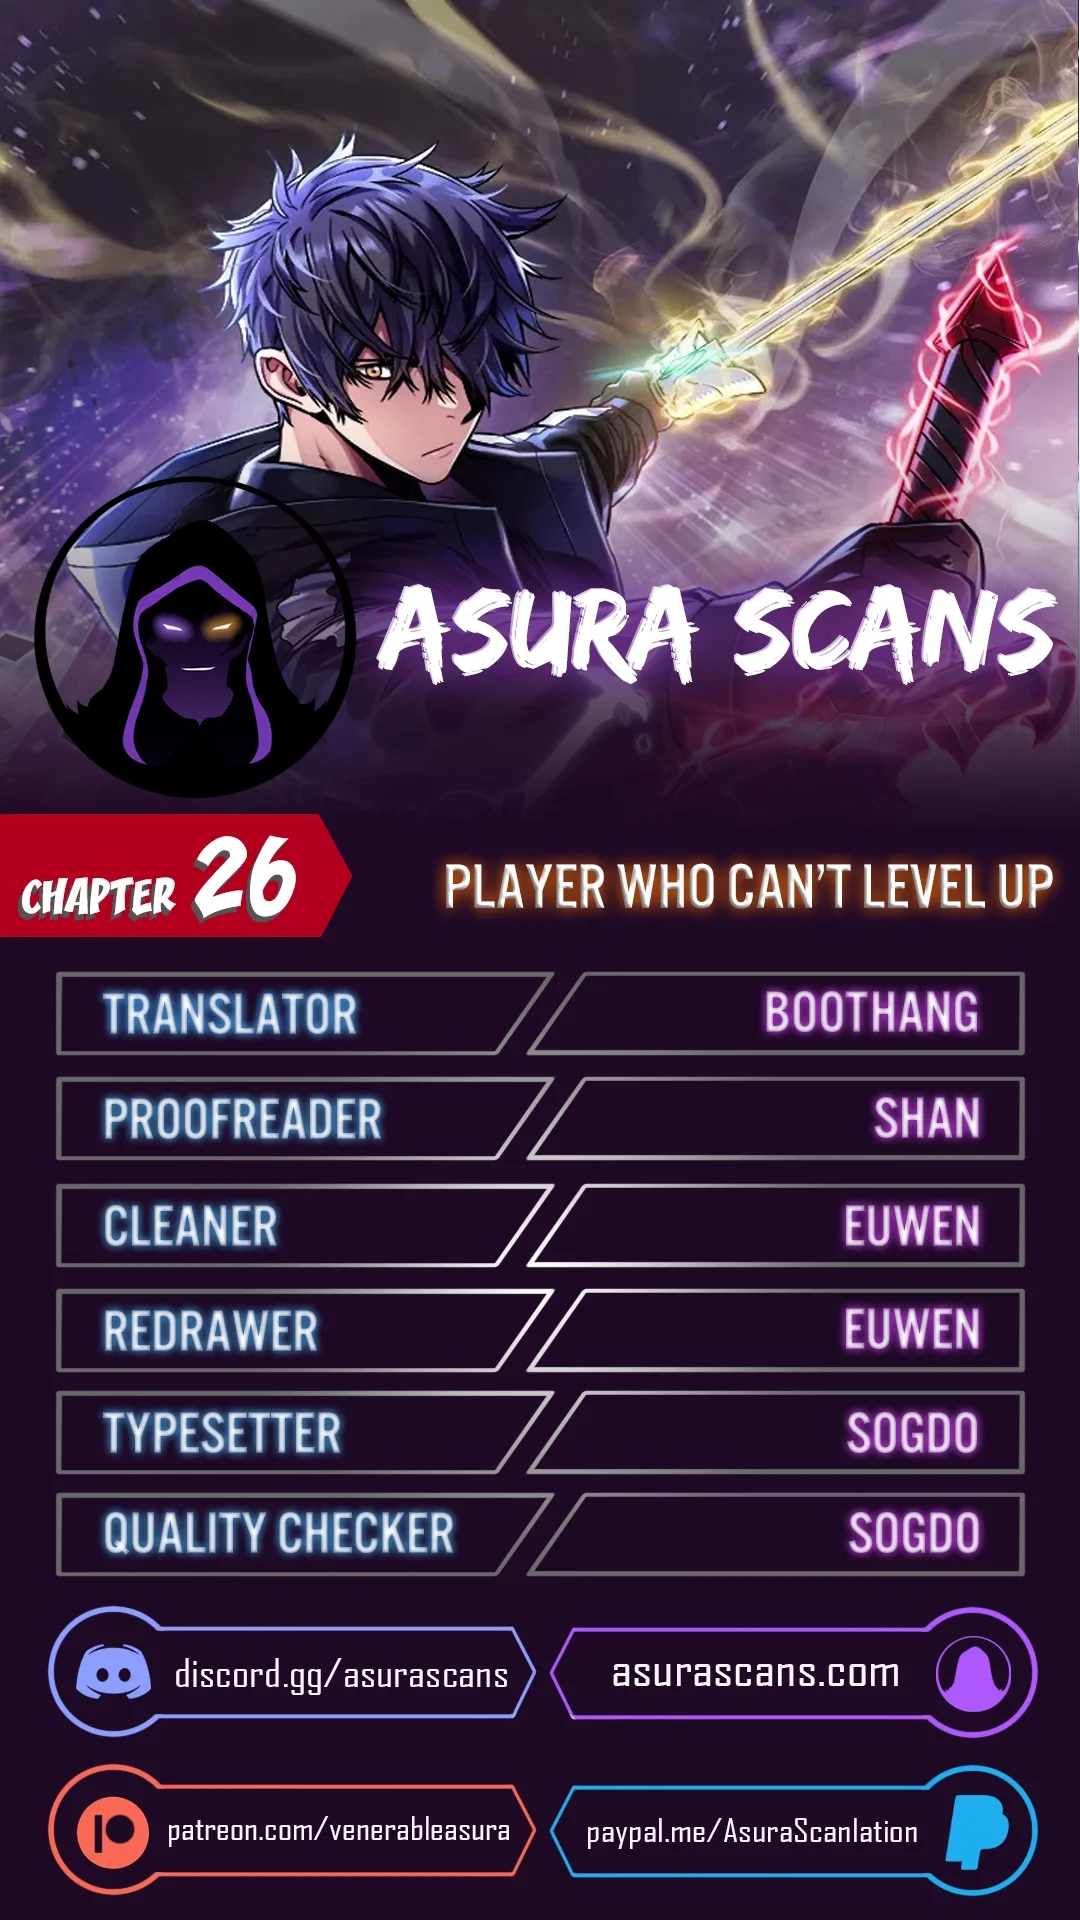 player-who-cant-level-up-chap-26-0